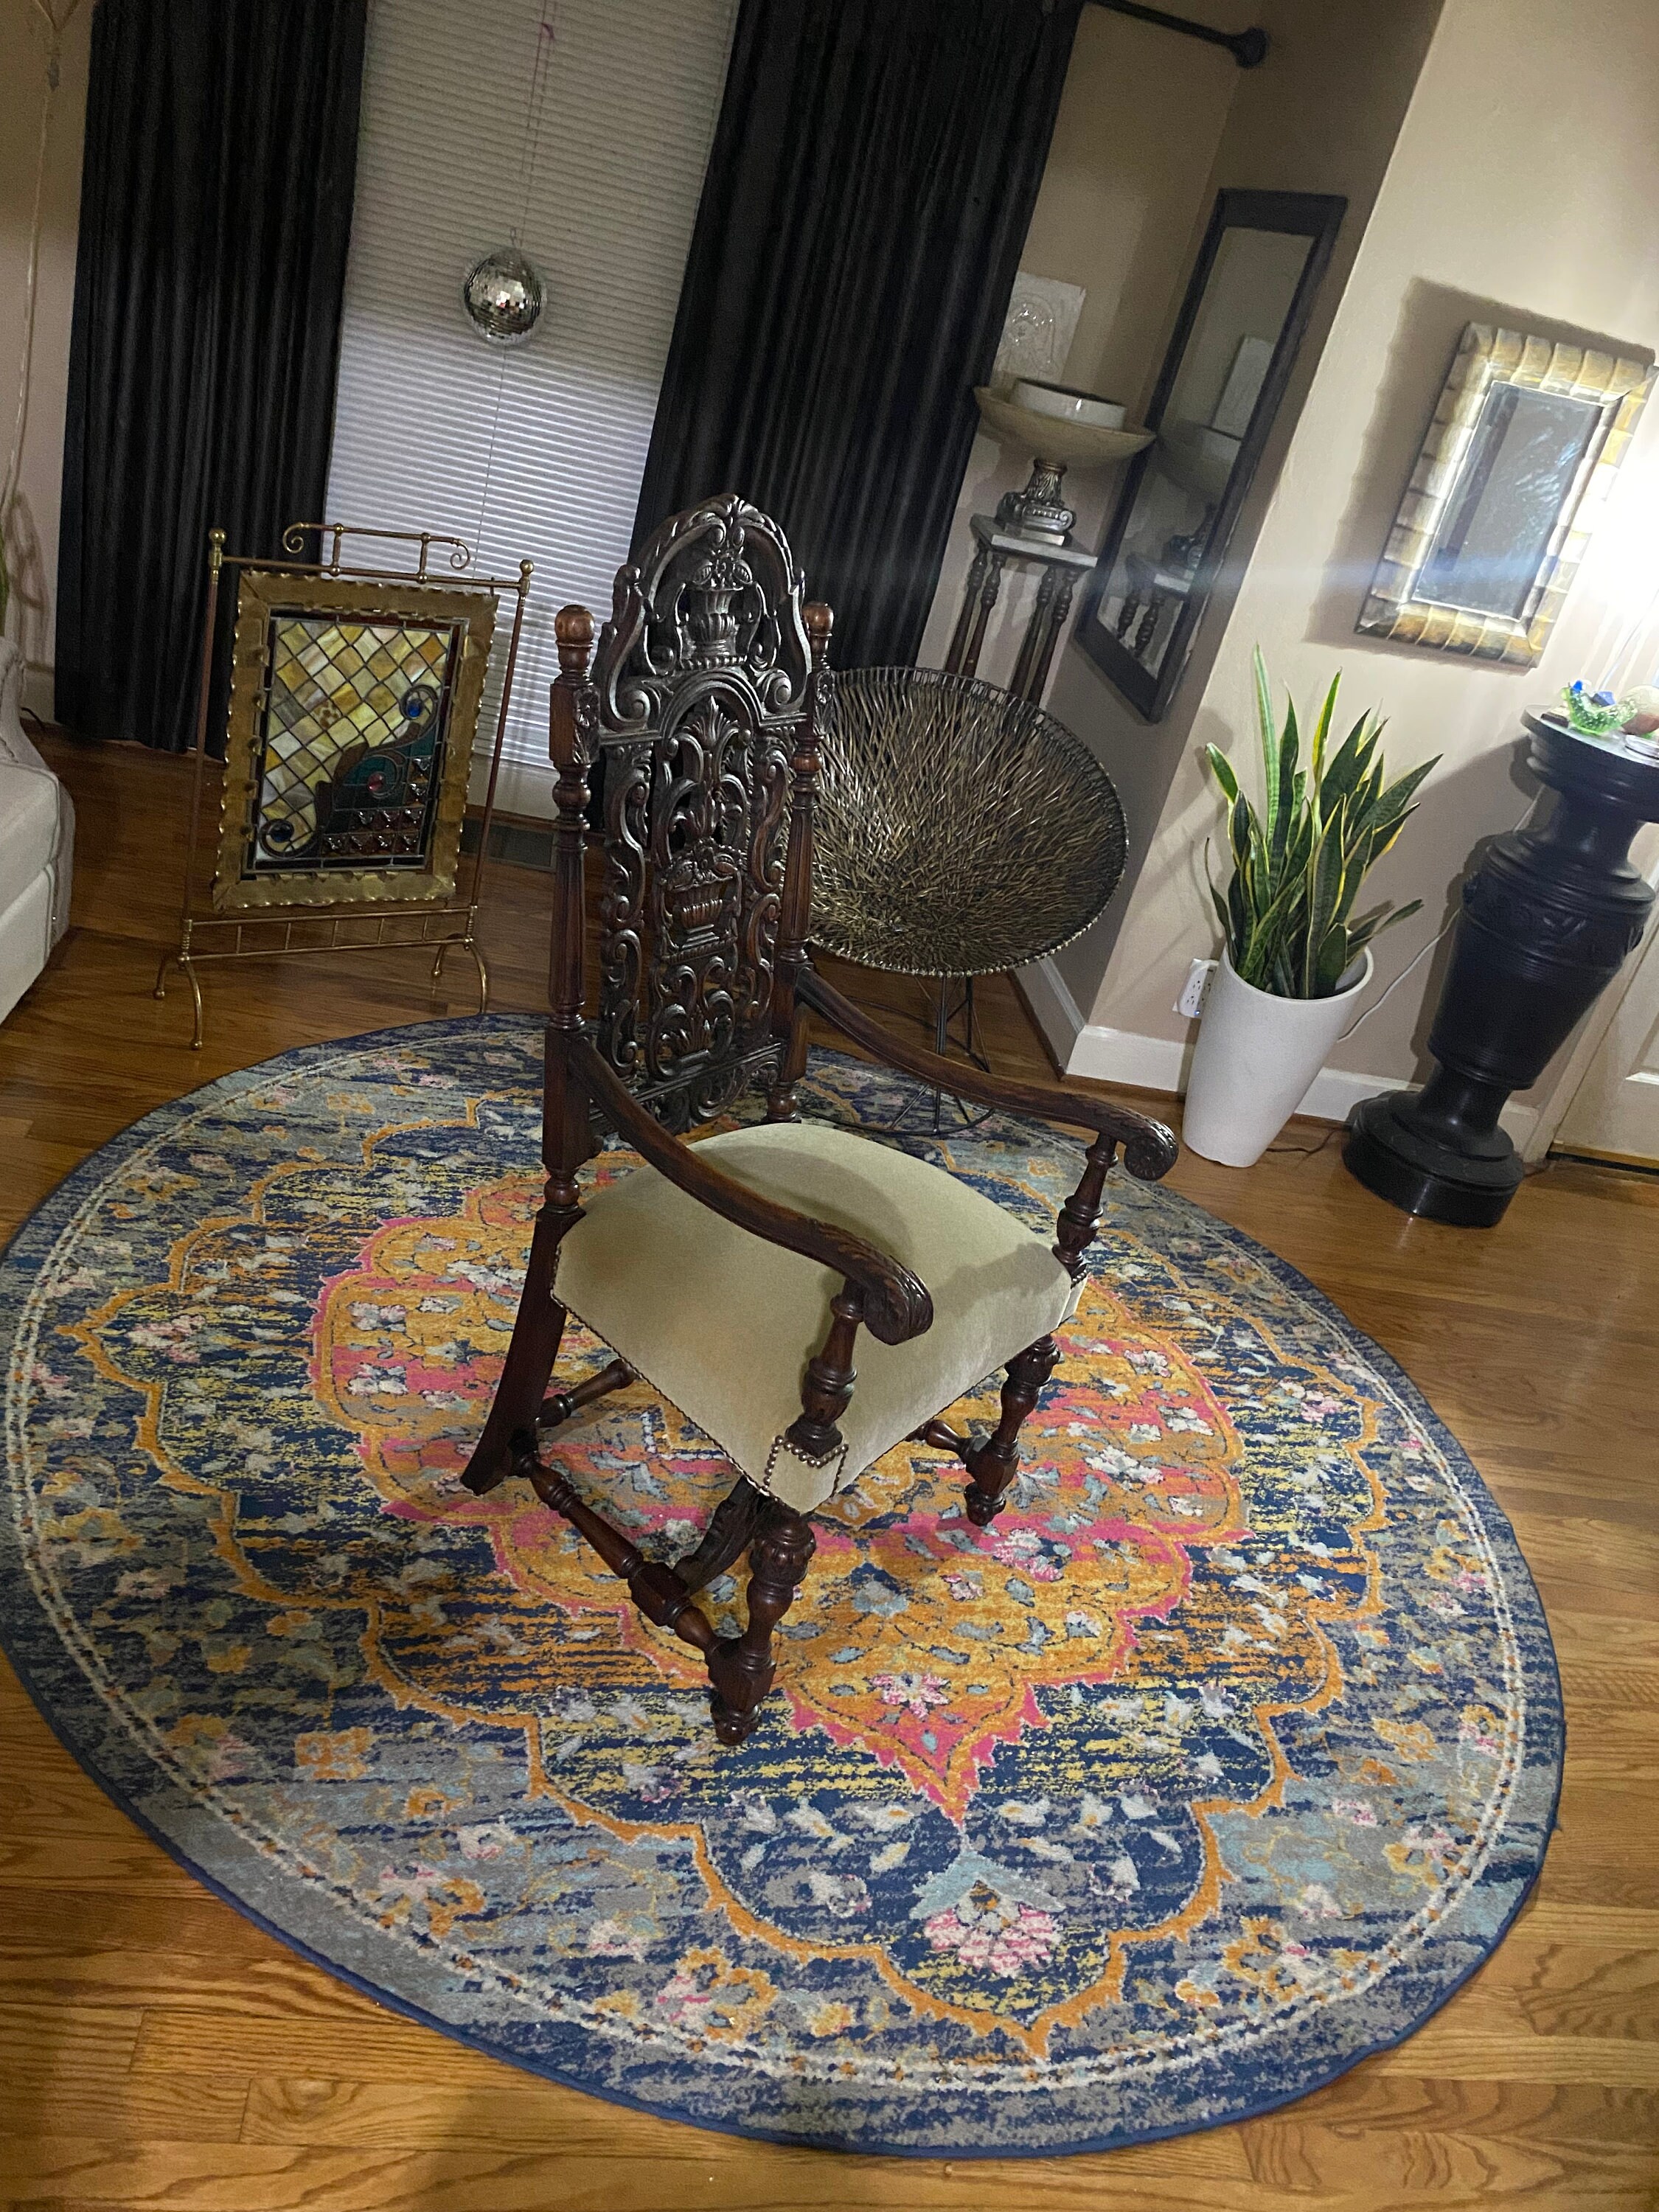 Antique Carved Wood Side Chair BIGMAII Fabric Upholstered Back Dining  Chair, King Louis Armchair with Flower Pattern, Royal Classic Entryway  Accent